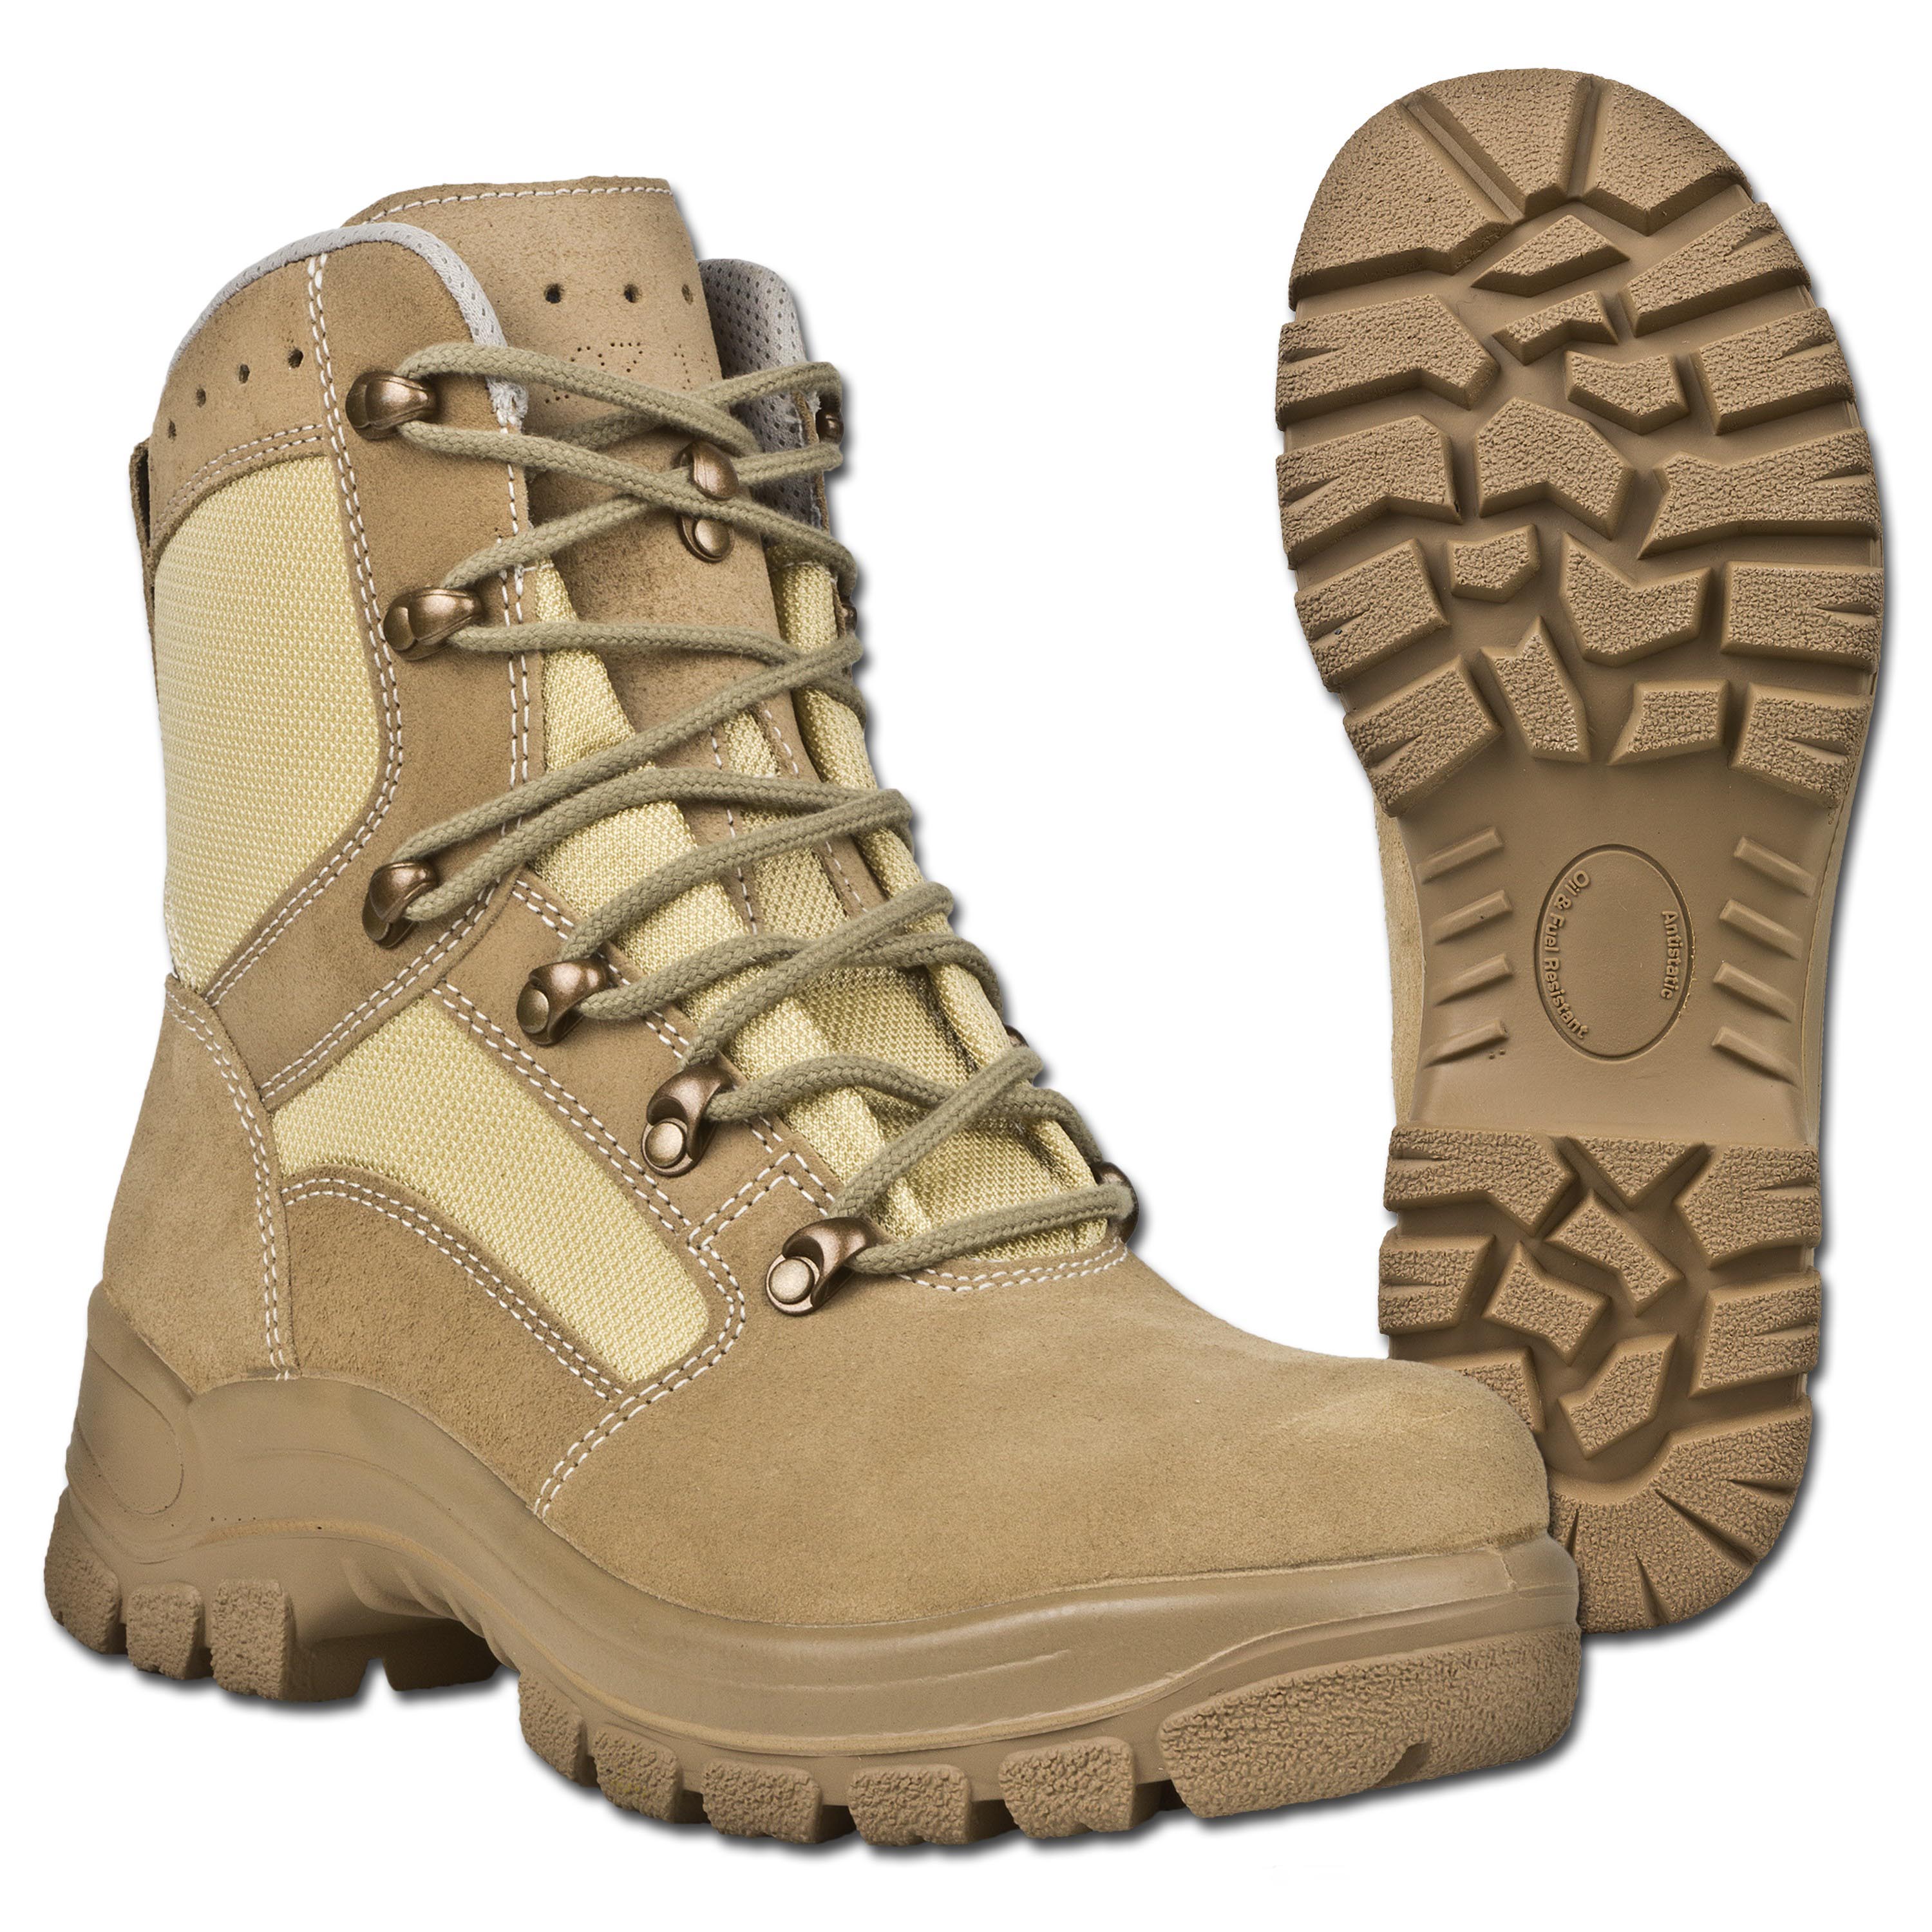 combat haix bw boot dry hot boots filter military hide show